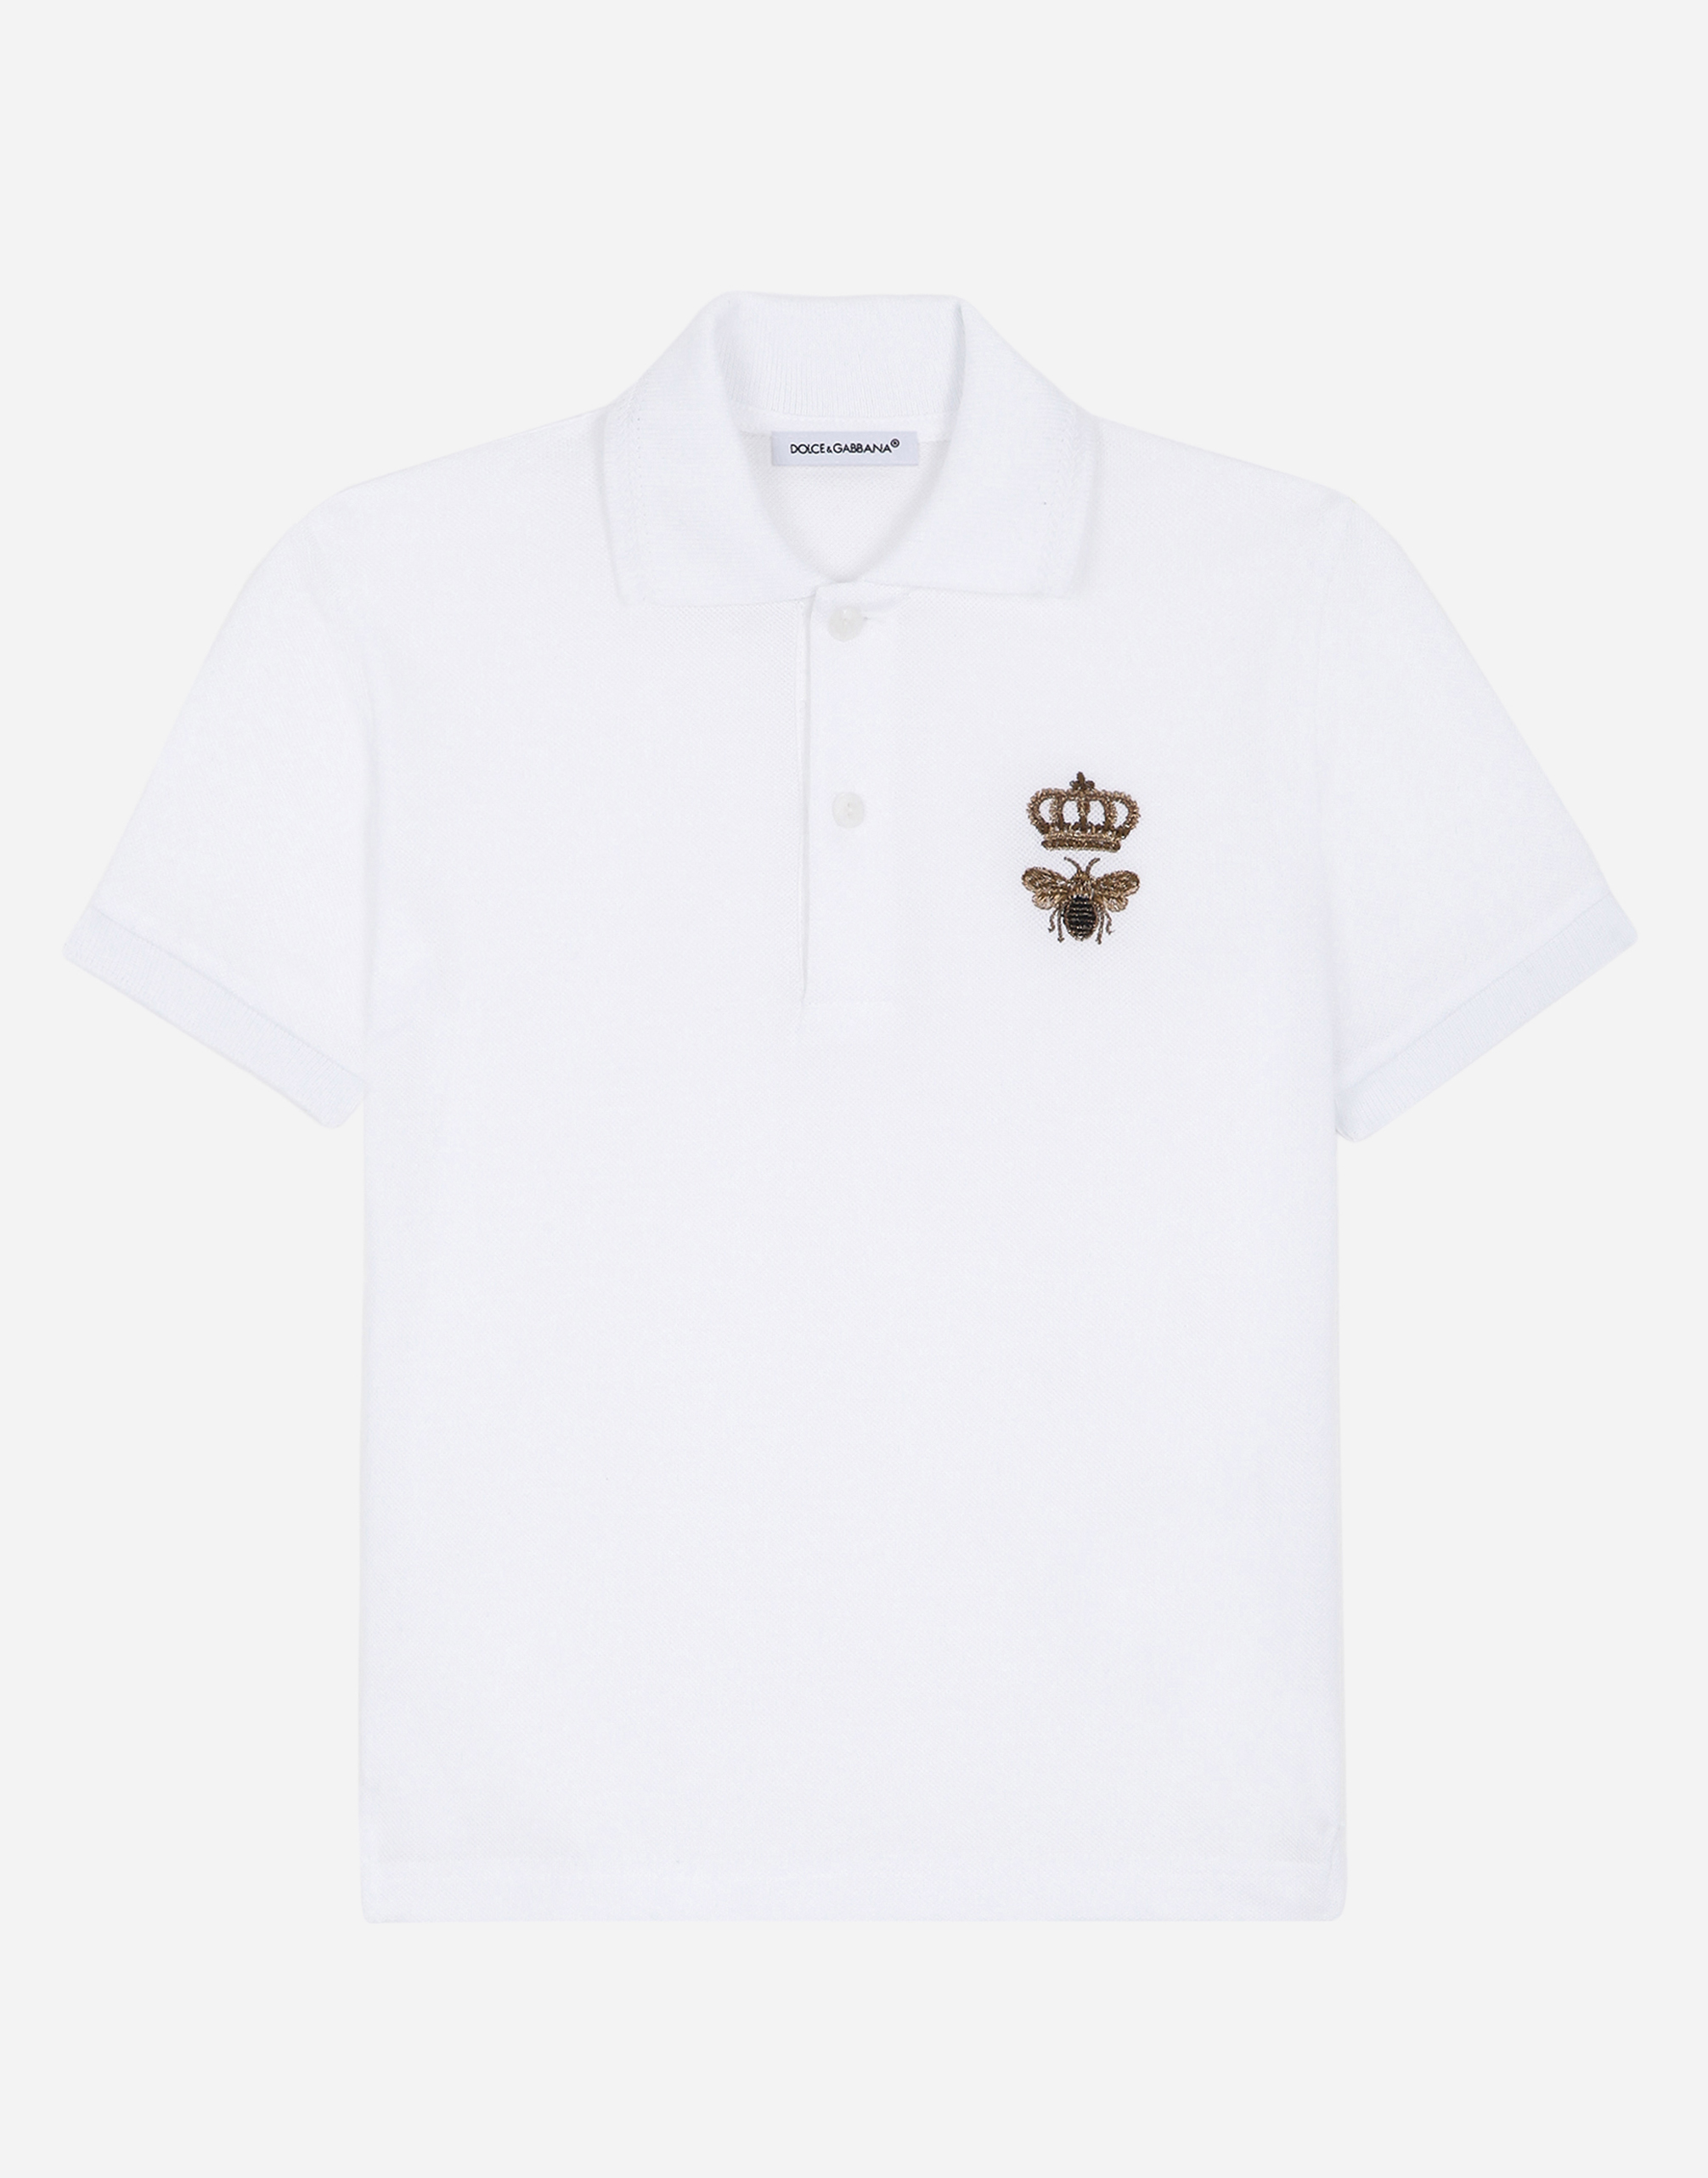 Dolce & Gabbana Crown and Bee Polo Shirt 46 White Cotton